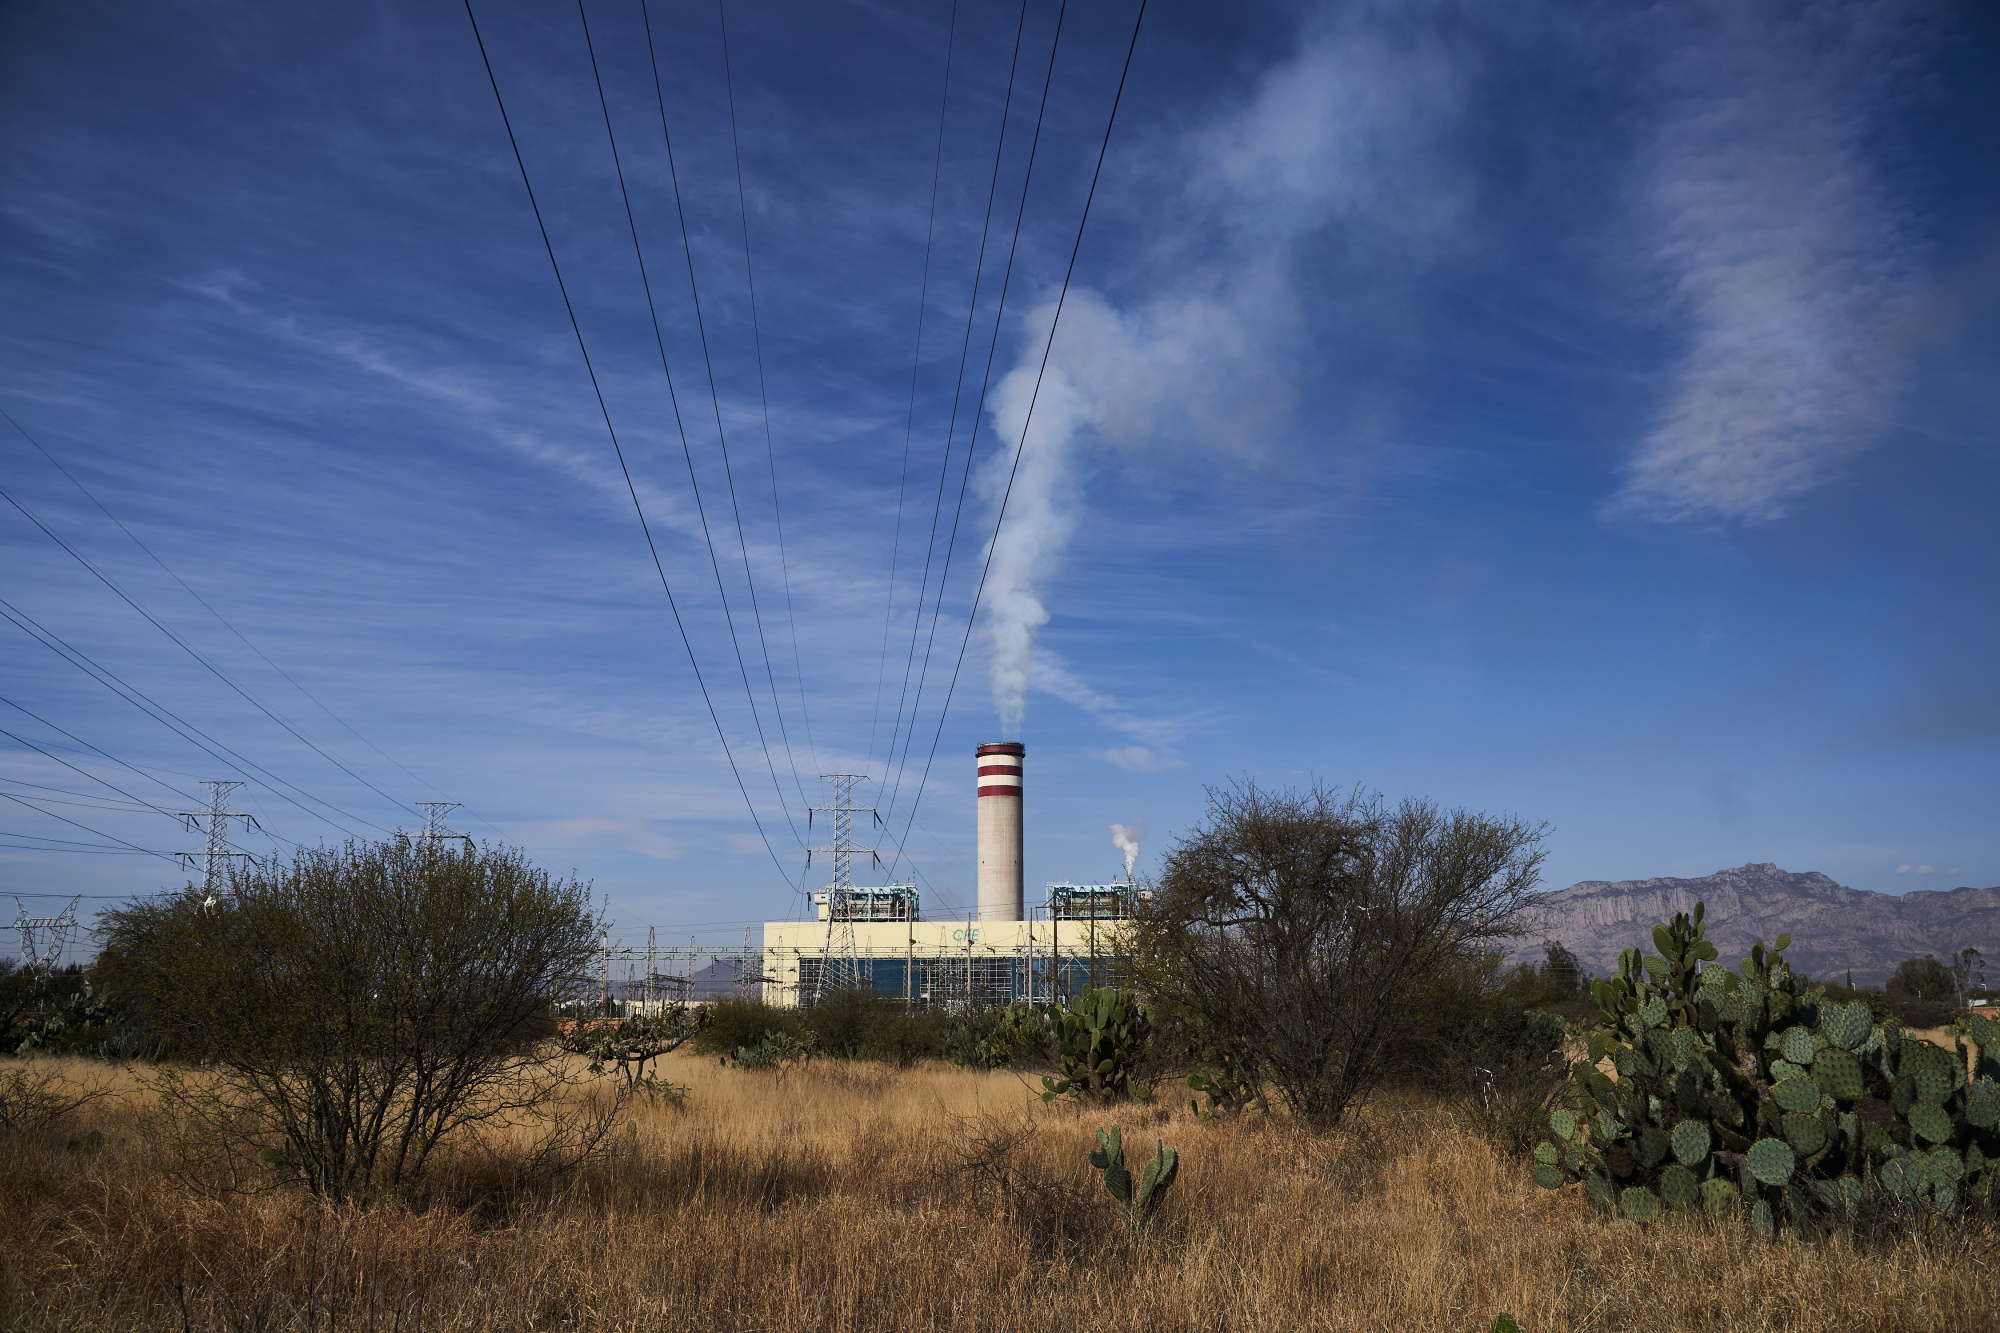 A thermoelectric power plant in Villa de Reyes, Mexico.